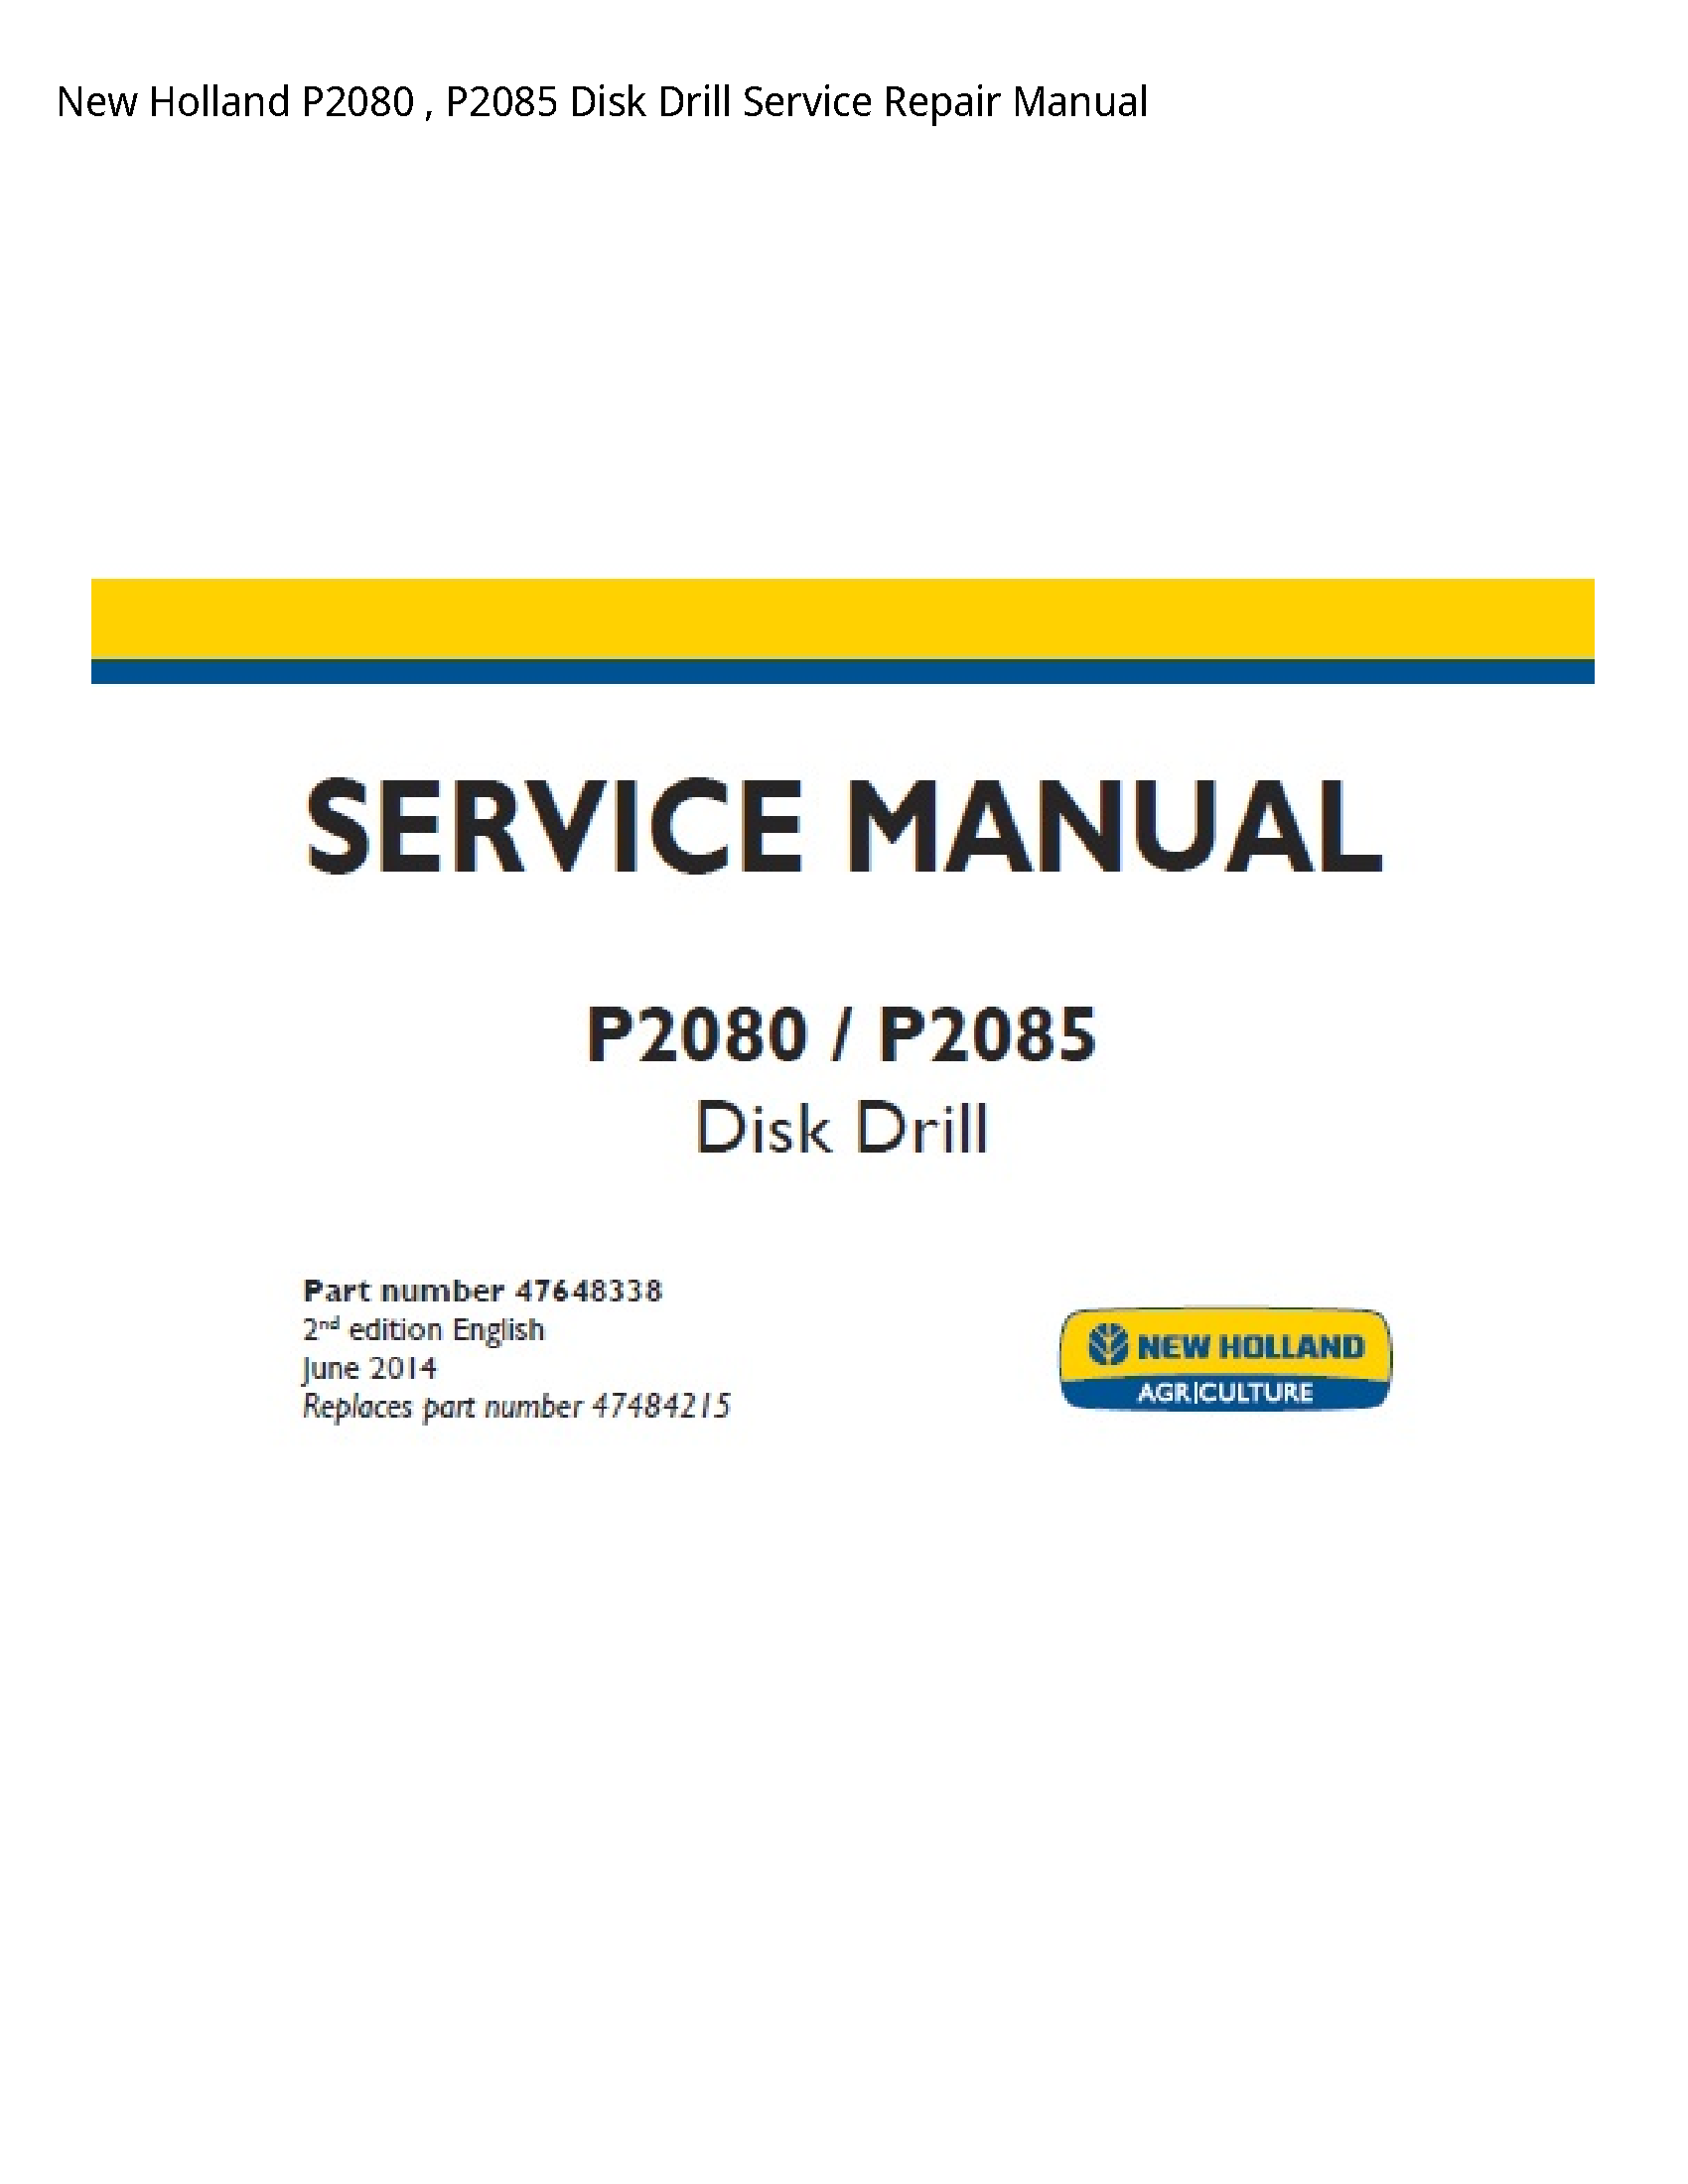 New Holland P2080 Disk Drill manual